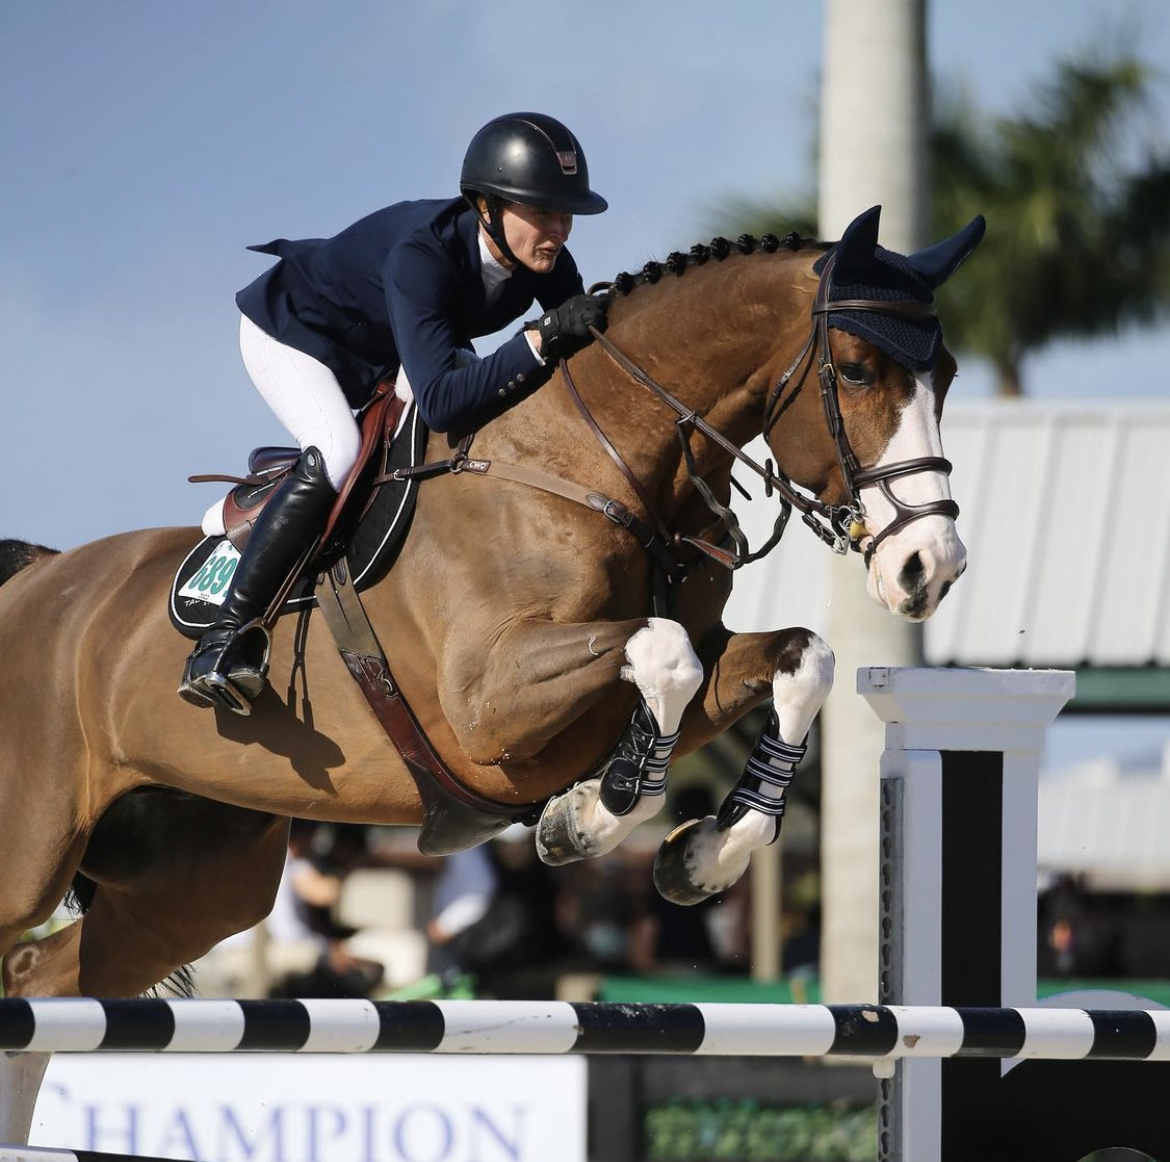 Hanakine and Molly Ashe in Fridays 1.35m class at WEF!